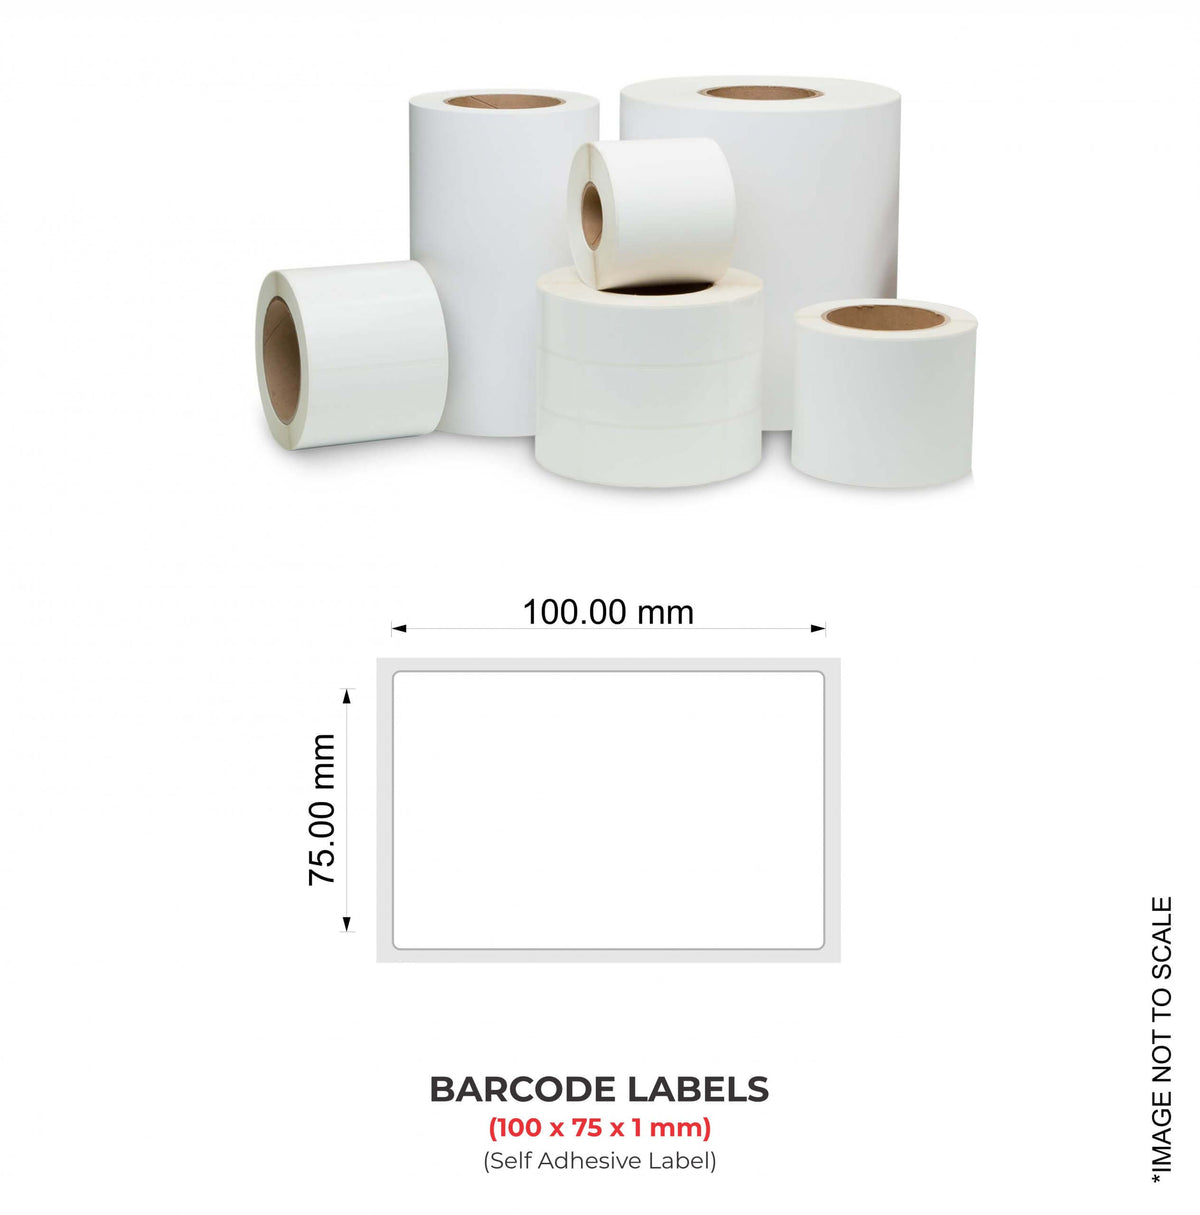 Barcode Labels (100x75x1mm), 700 Labels Per Roll (Self Adhesive Label)